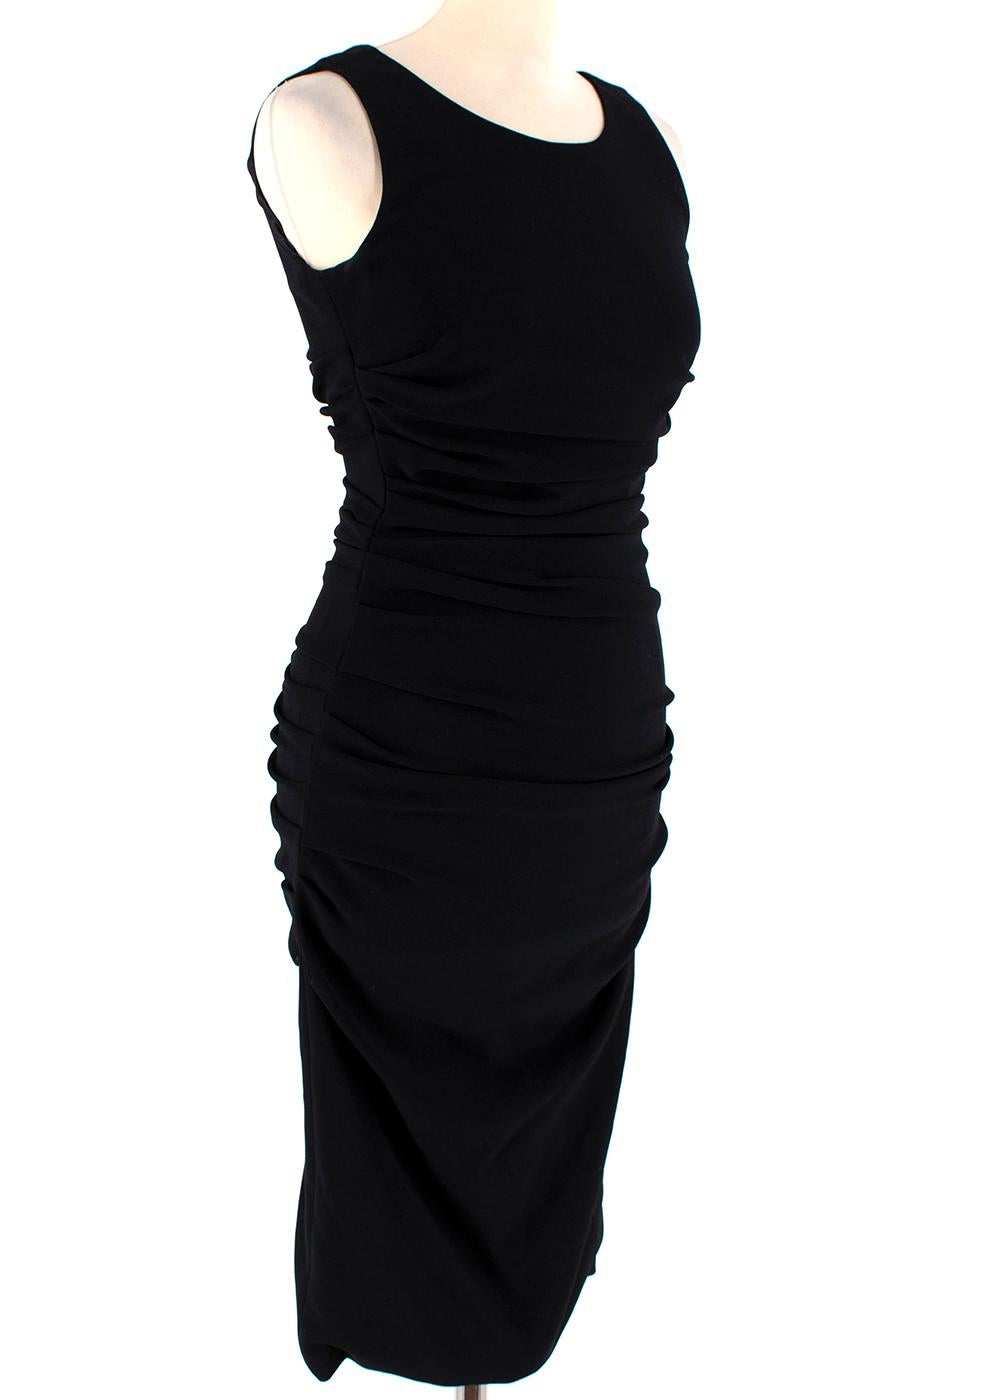 Dolce & Gabbana Ruched Black Sleeveless Dress 

- Fully Lined 
- Concealed Back Zip Closure 
- Round Neck-line 
- Ruched Sides and Back
- Draped Front 
- Slim Fitting 

Material: 
- 100% Silk Lining 
- 88% Viscose 
- 7% Spandex and Elastane 
- 5%